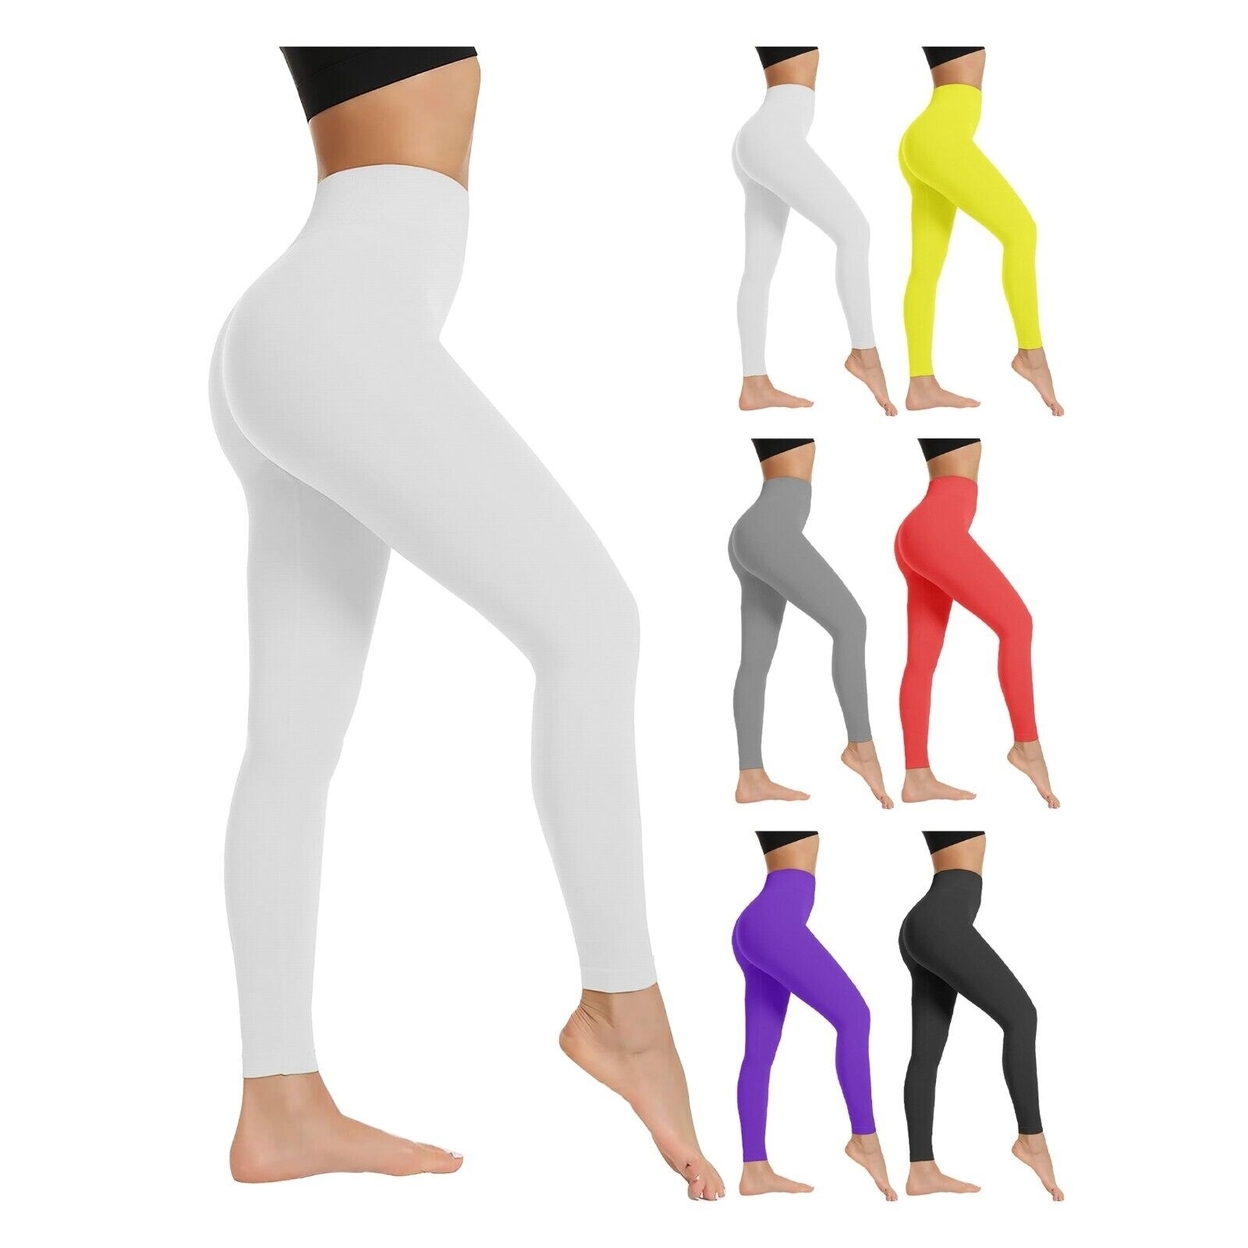 2-Pack: Women's High Waist Super Soft Active Athlete Stretch Yoga Cozy Leggings - Yellow & Yellow, Small